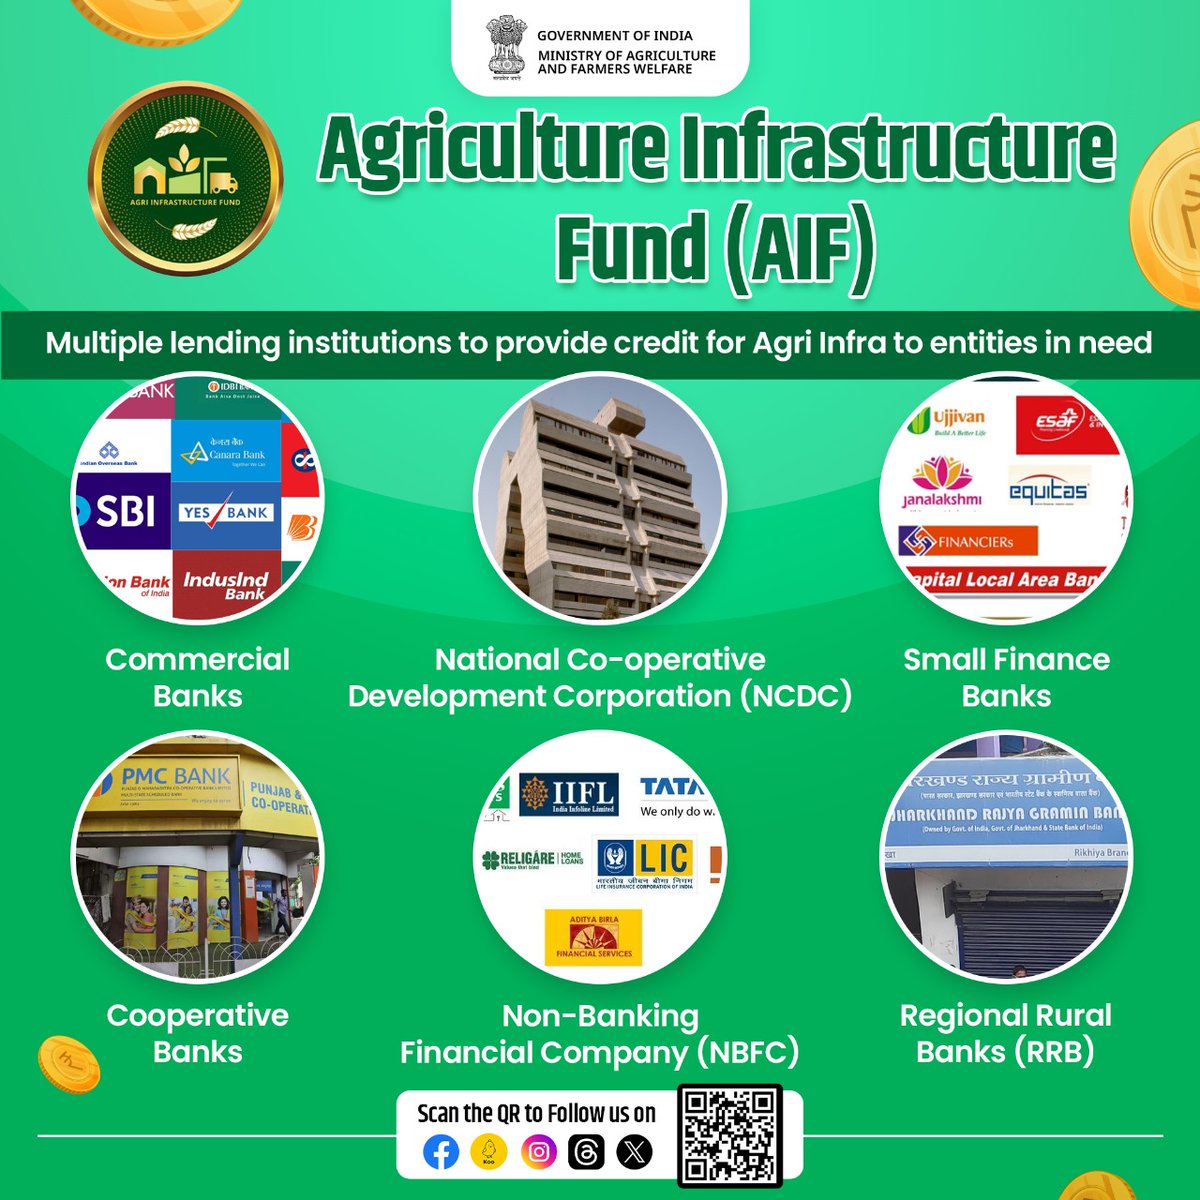 Self-reliant Indian #Agriculture! #AgricultureInfrastructureFund provides credit facilities for #agriinfra like #postharvest management to entities in need via multiple lending institutions mentioned here. Visit agriinfra.dac.in for more information. #agrigoi #AIF